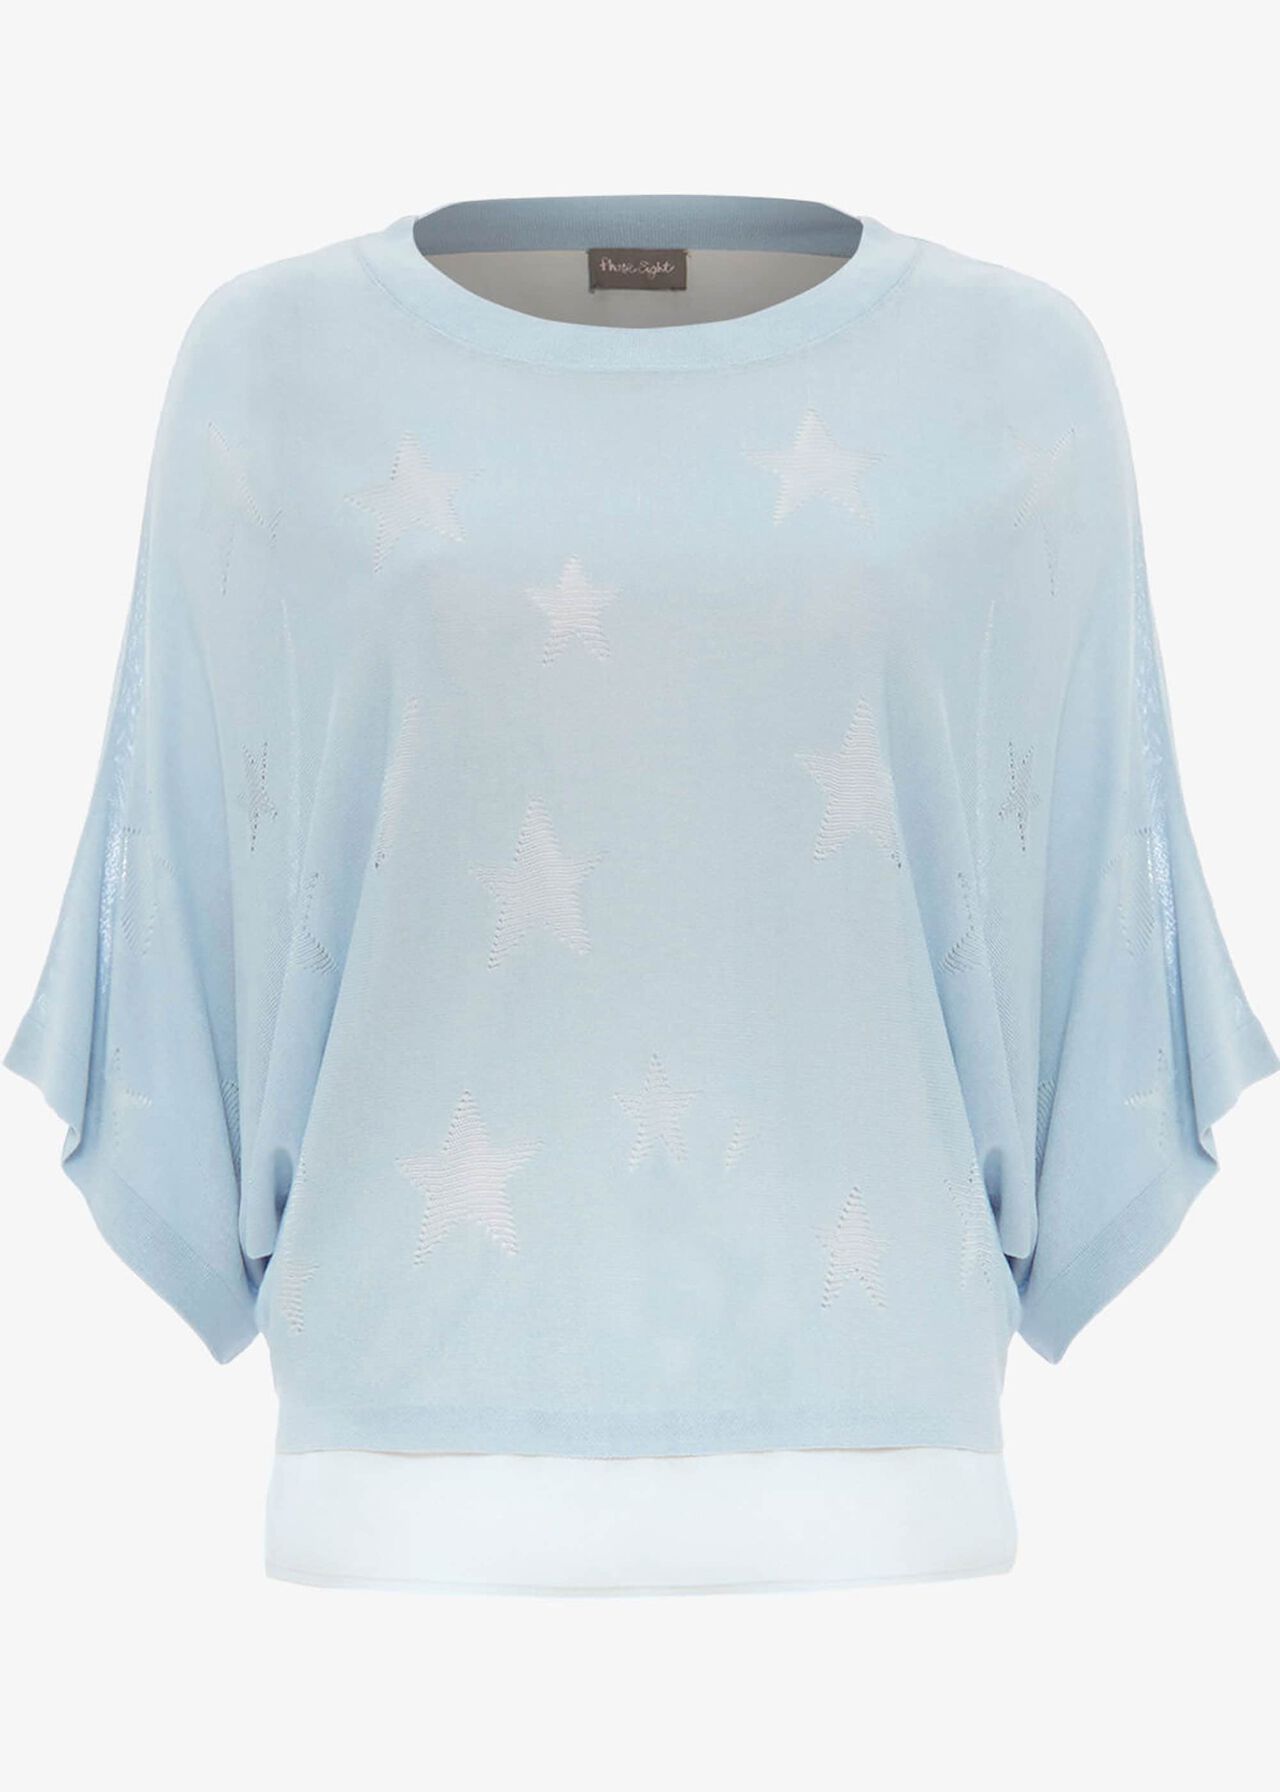 Gisella Star Stitch Knitted Top